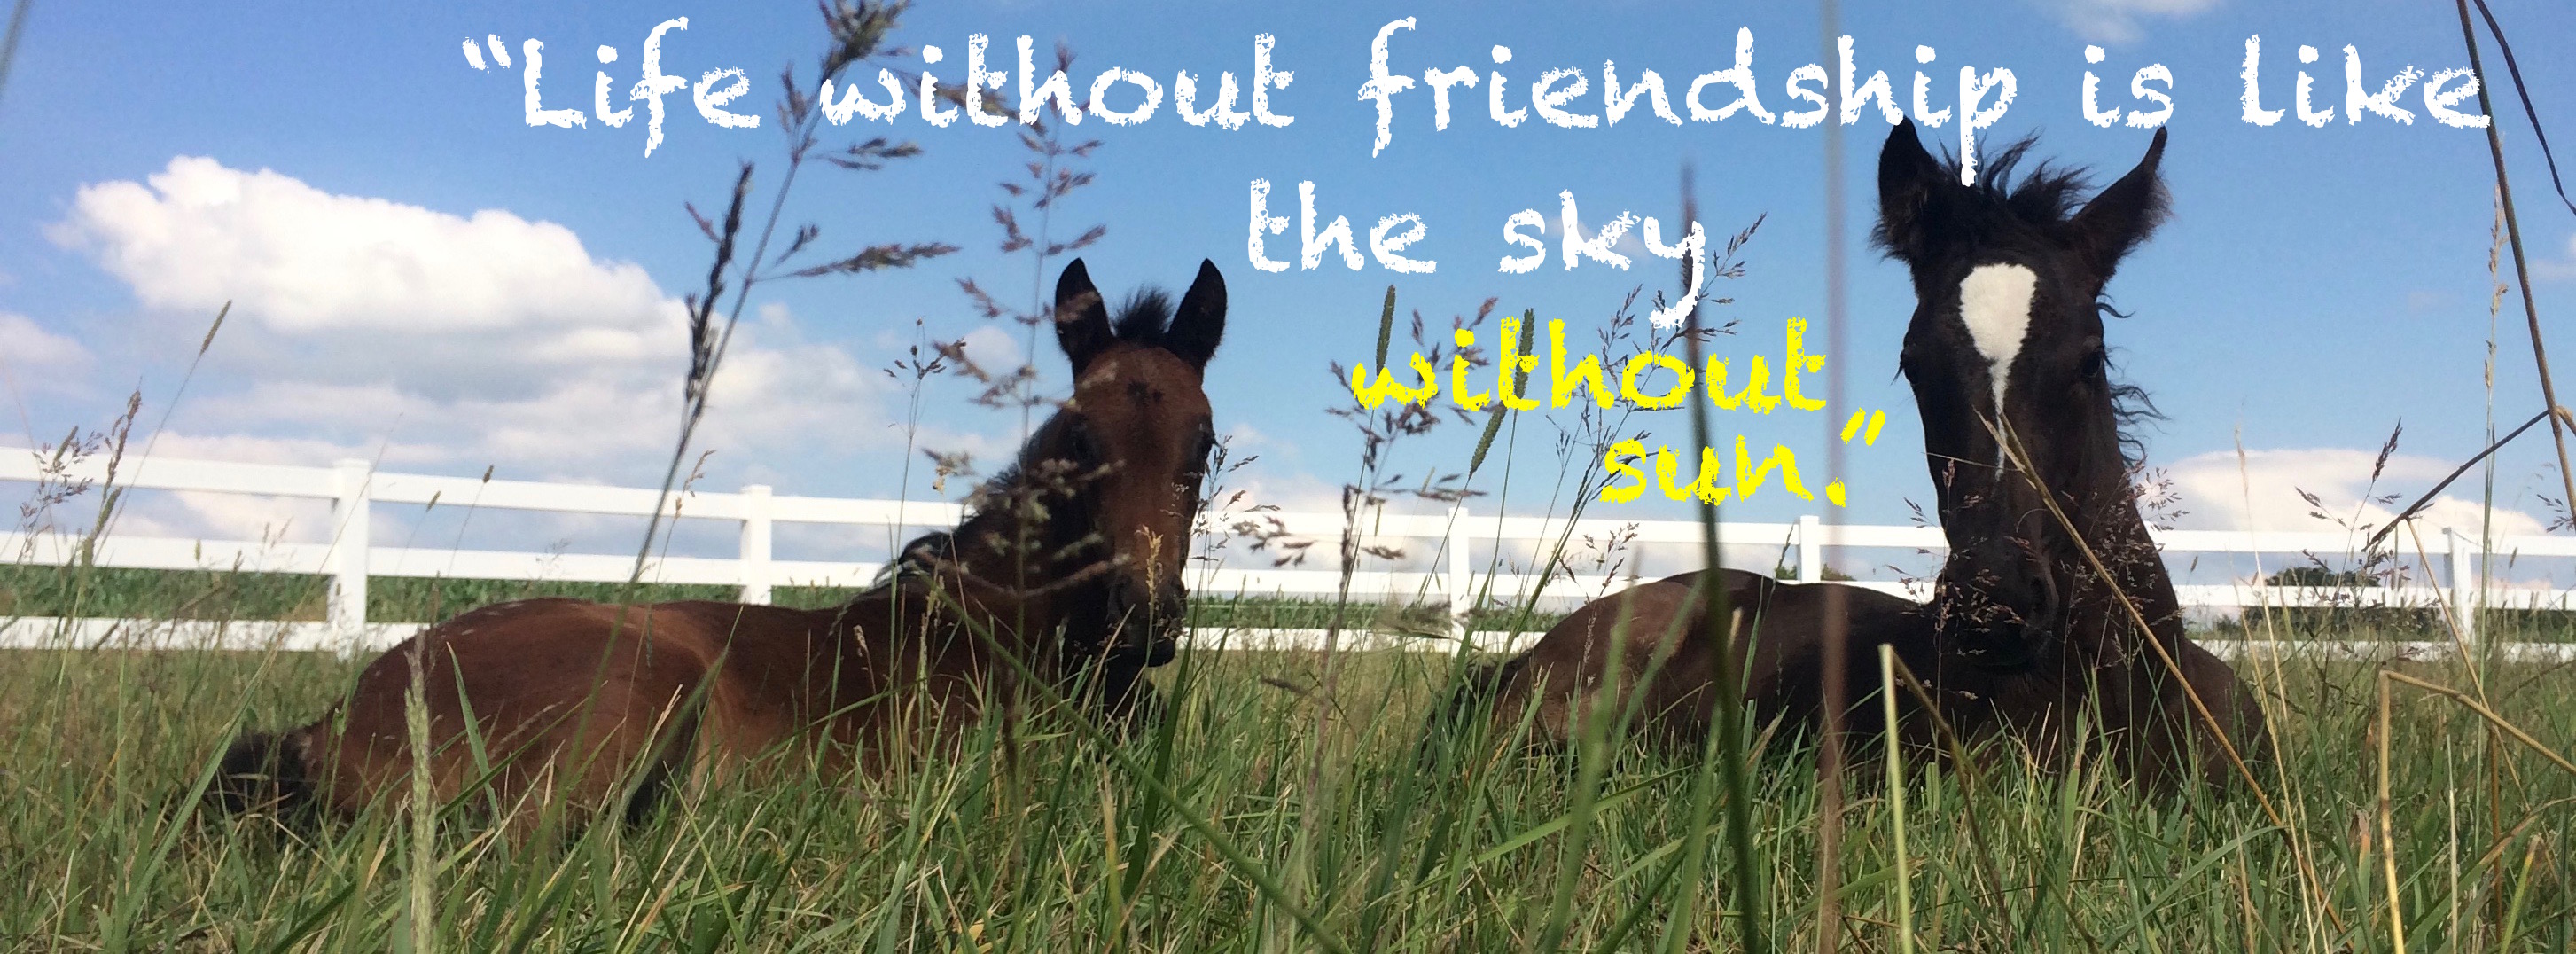 Life without friendship is like the sky without sun.